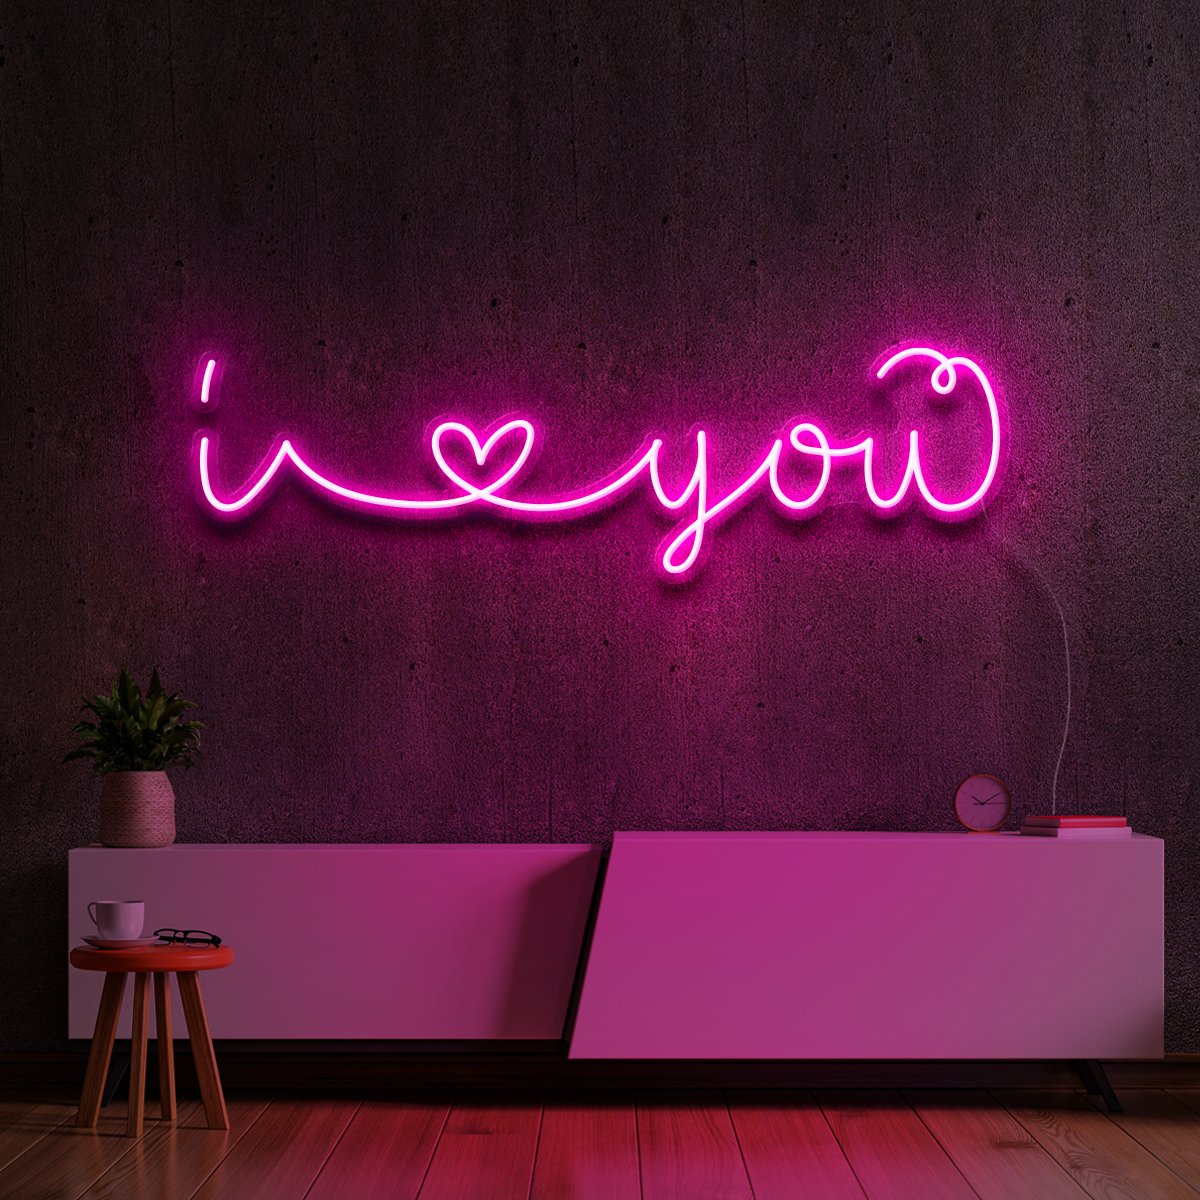 "I Love You" Neon Sign 60cm (2ft) / Pink / LED Neon by Neon Icons